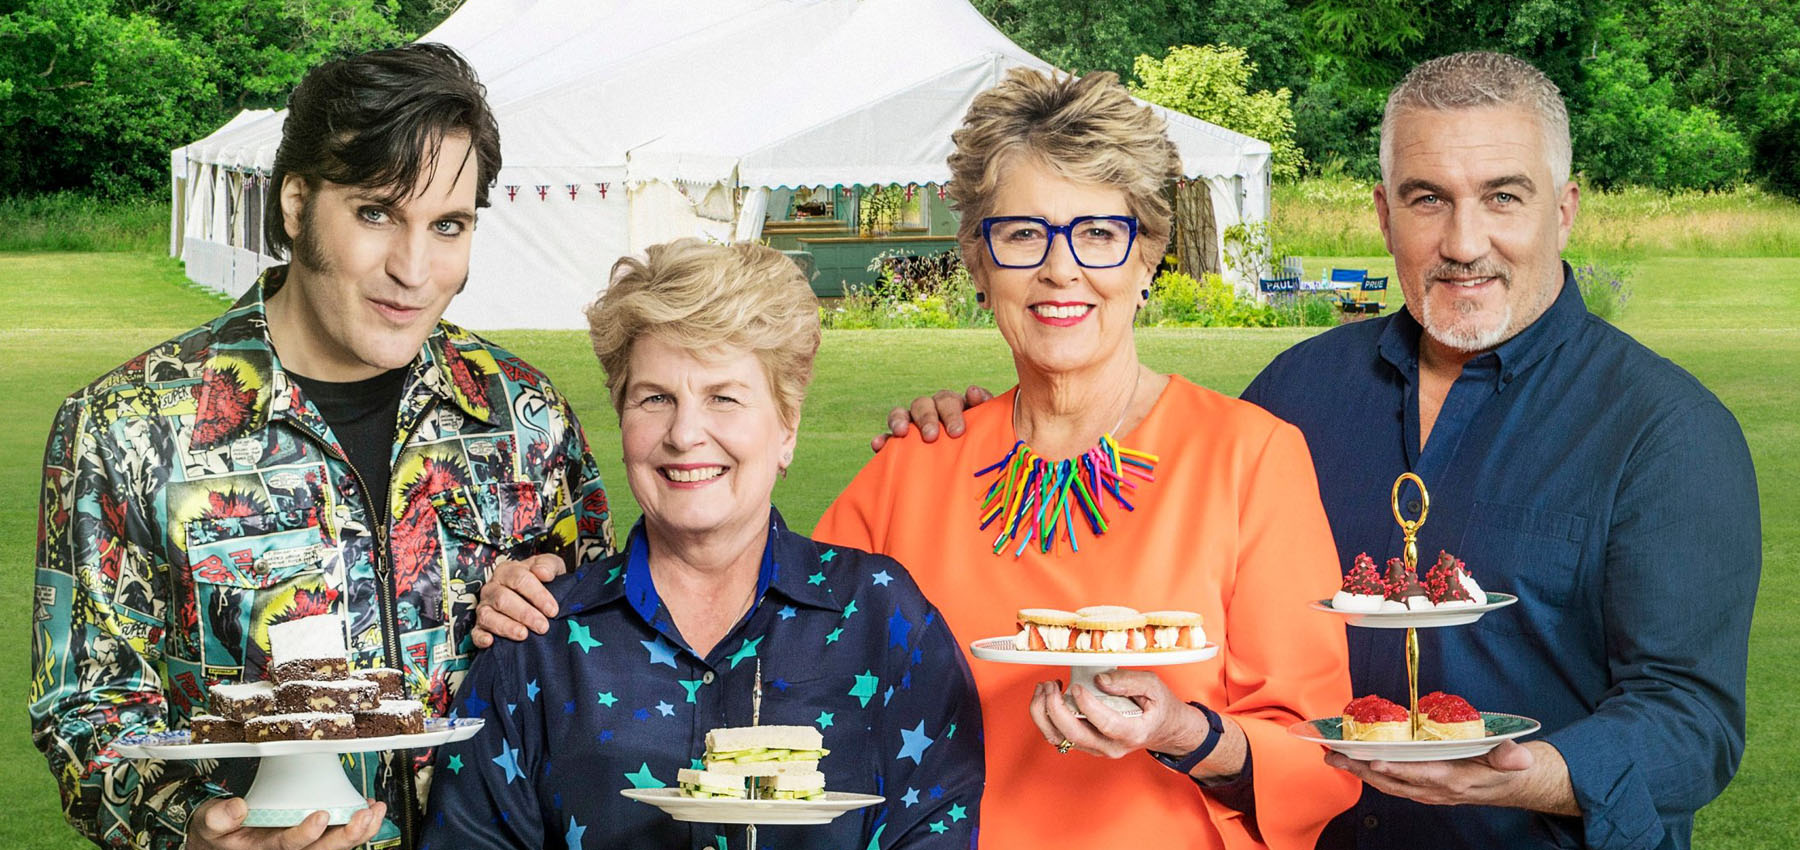 The Great British Bake Off 2018 - Preview